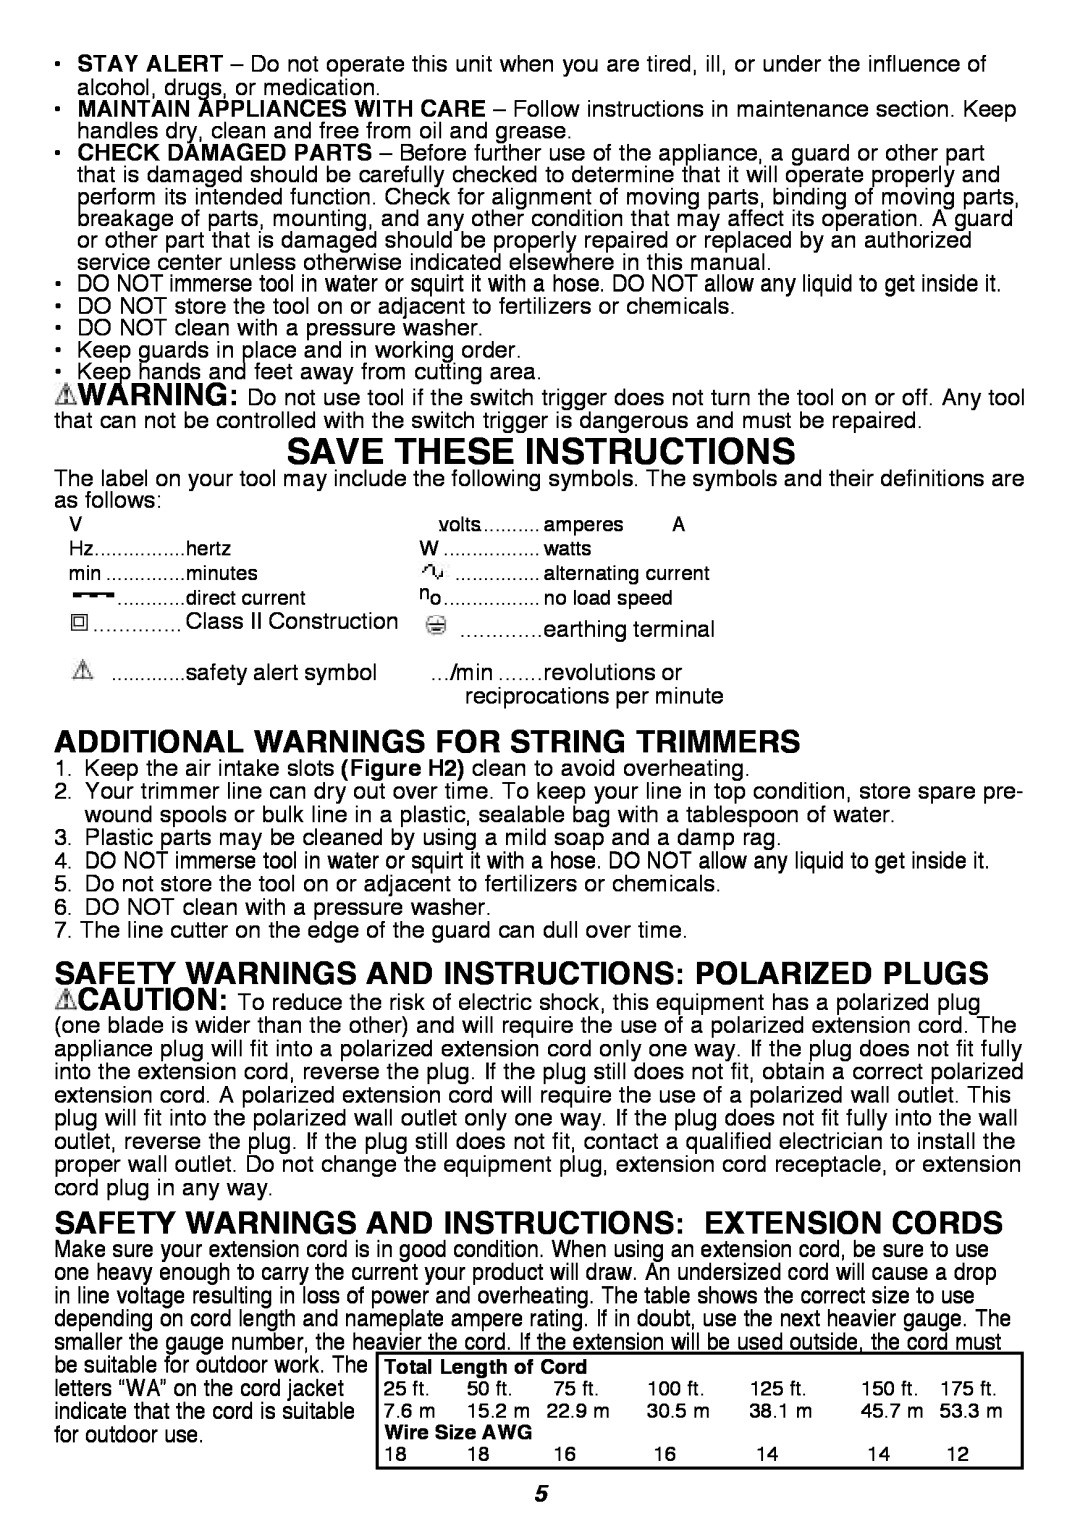 Black & Decker SF-080 instruction manual Save These Instructions, Additional Warnings For String Trimmers 